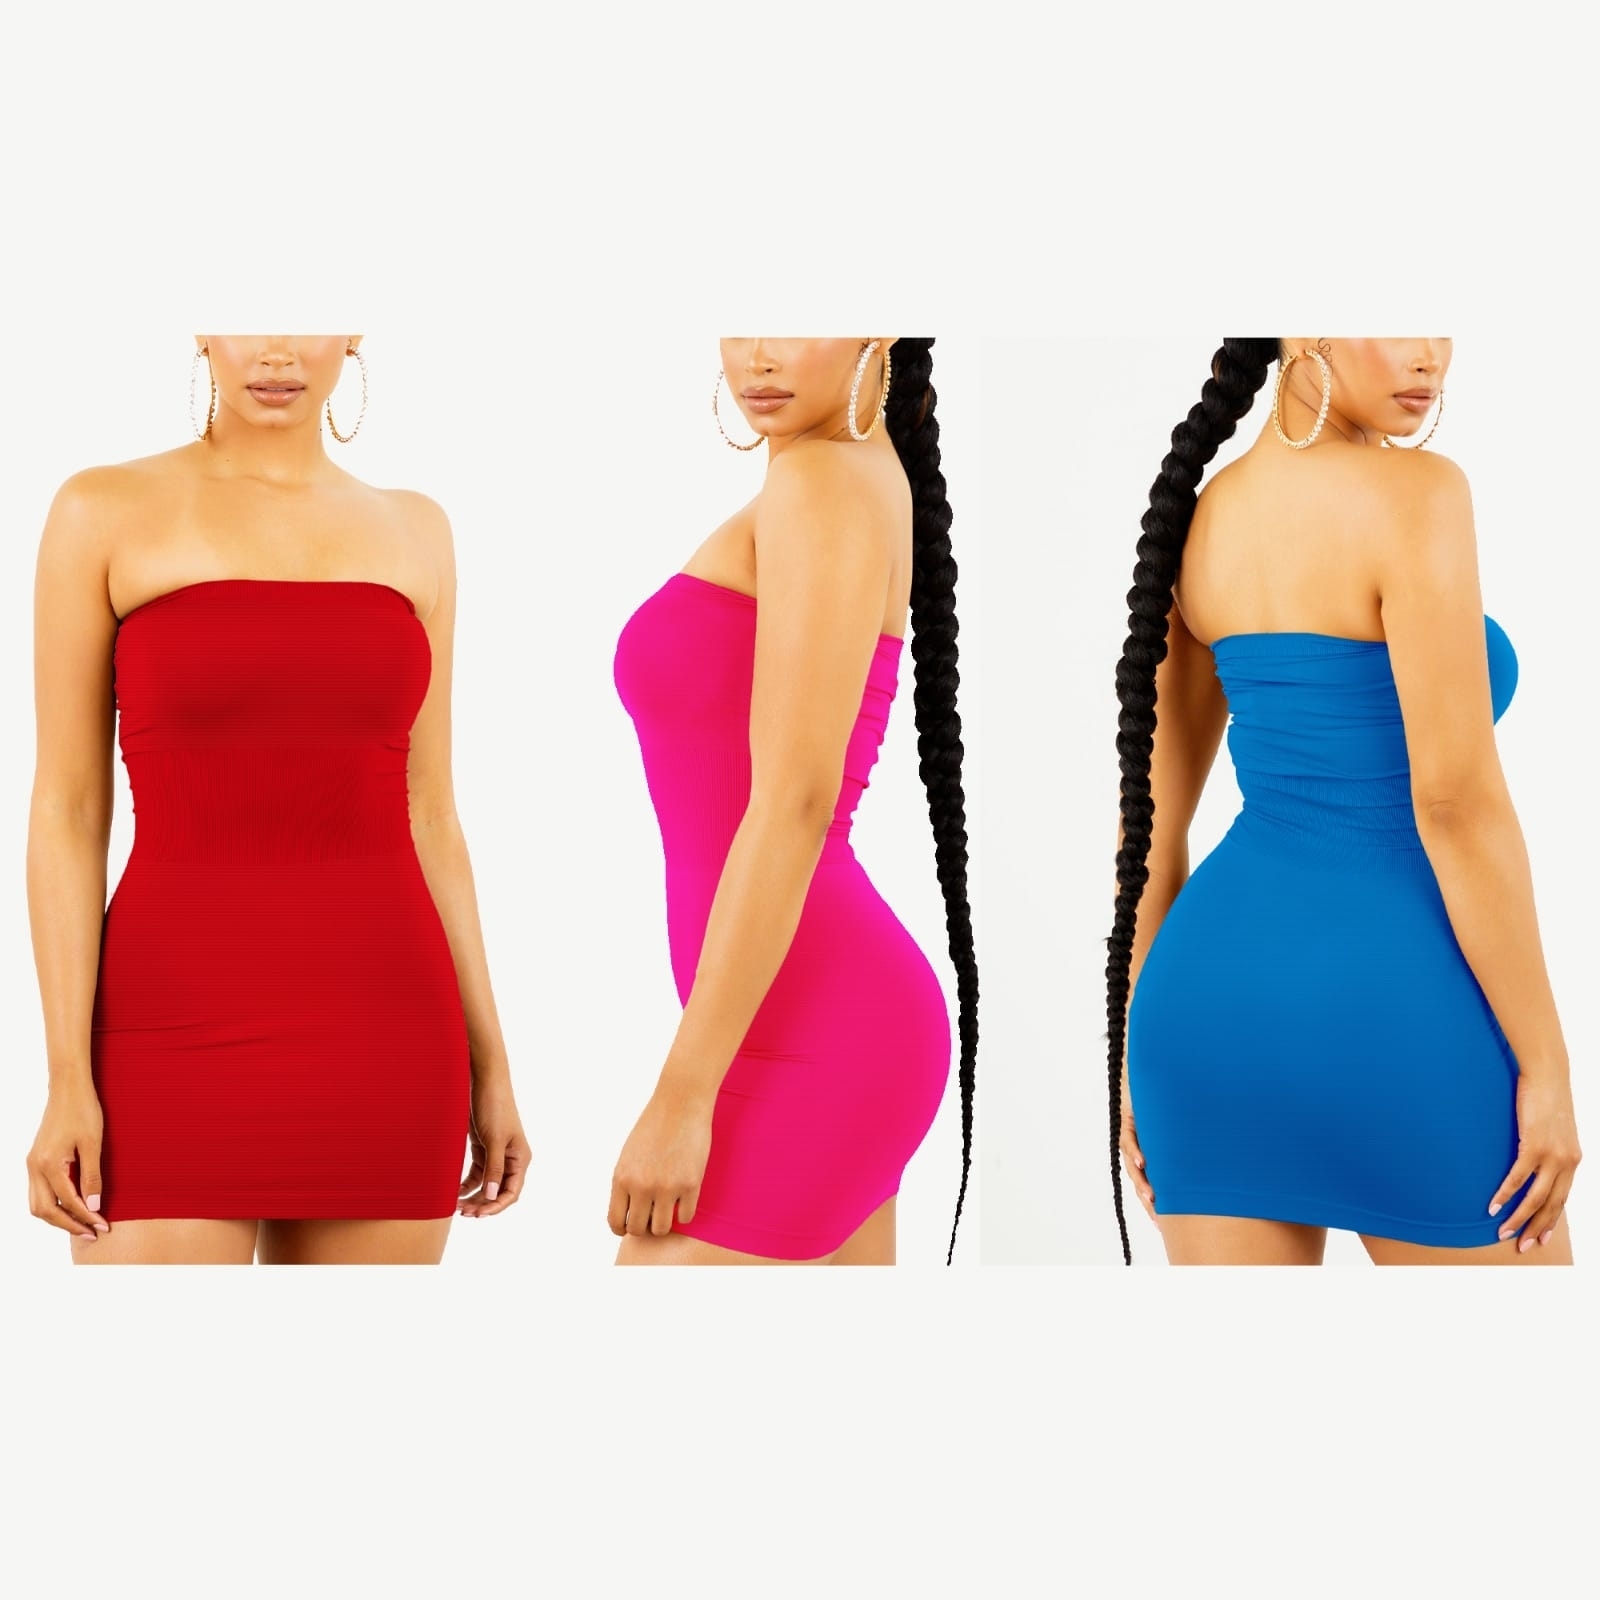 2-Pack Women's Strapless Stretchy Tight Fit Seamless Body Con Mini Tube Top Dress - BLUE, M